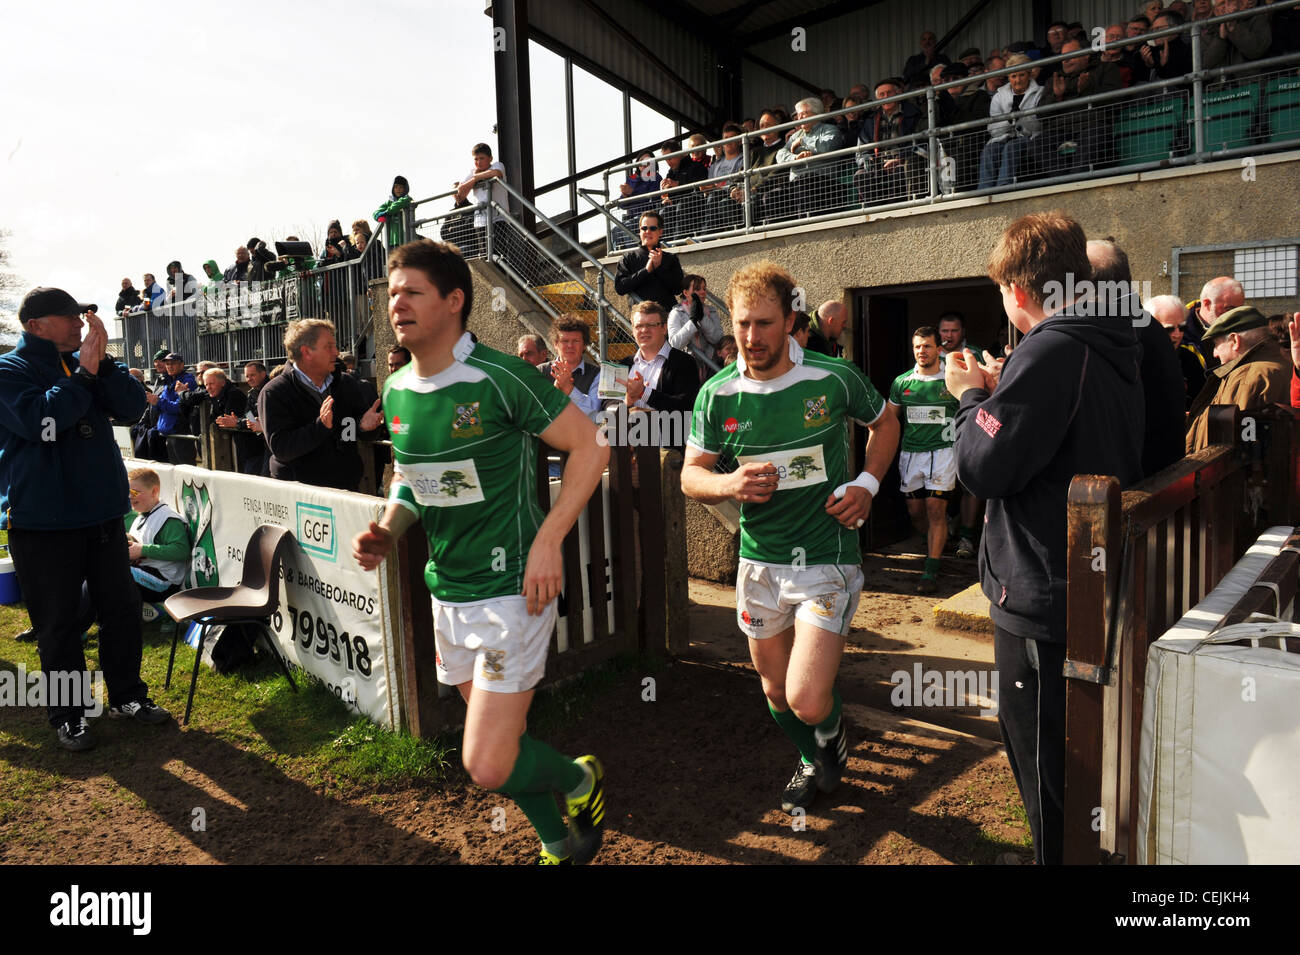 Players enter the pitch to a Rugby game, Wharfedale Rugby Union Football Club, North Yorkshire UK Stock Photo